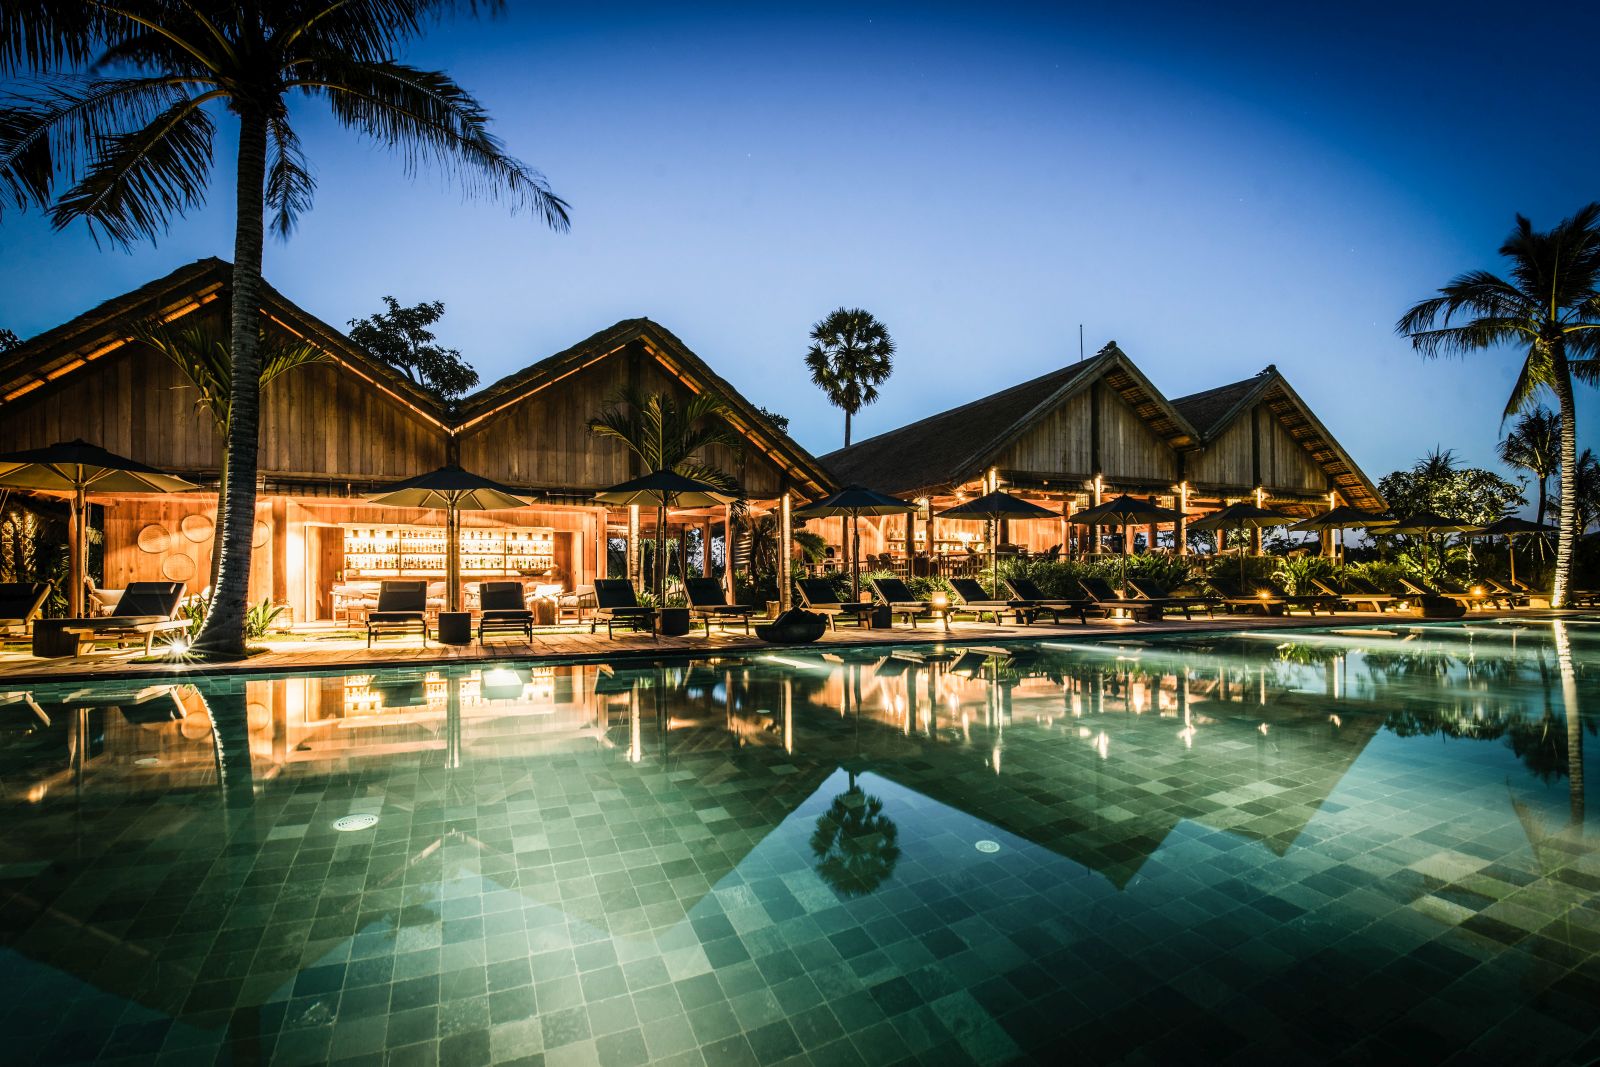 Evening view of the swimming pool at Phum Baitang hotel in Cambodia